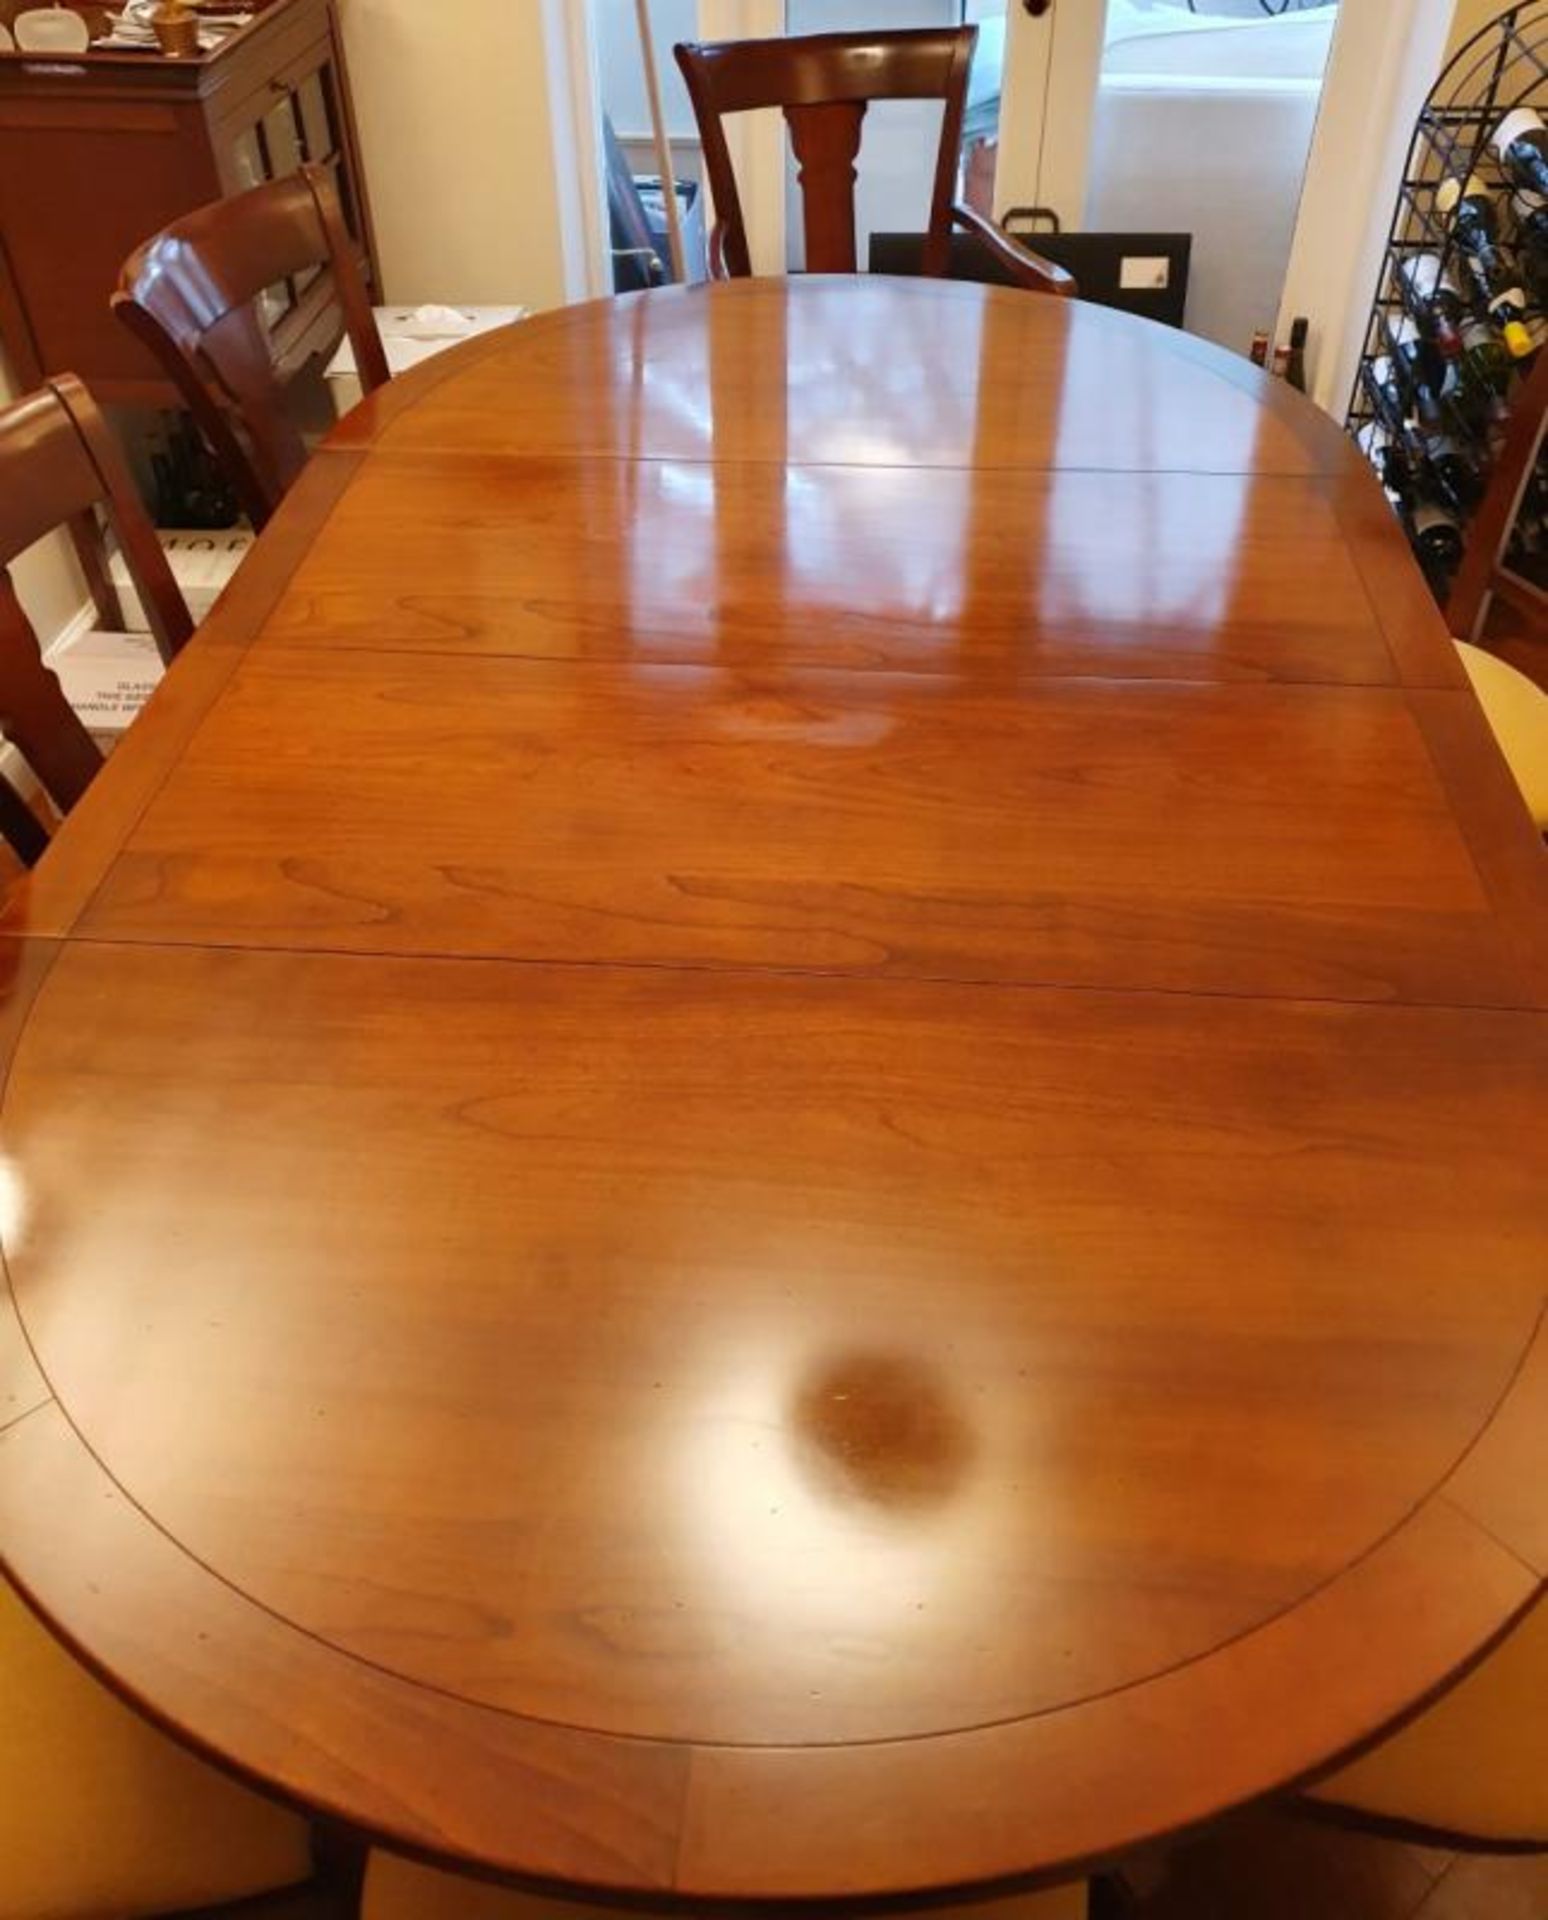 1 x GRANGE Dining Table in Solid Cherry Wood with 8 Matching Chairs - CL473 - Location: Bowdon WA14 - Image 4 of 18